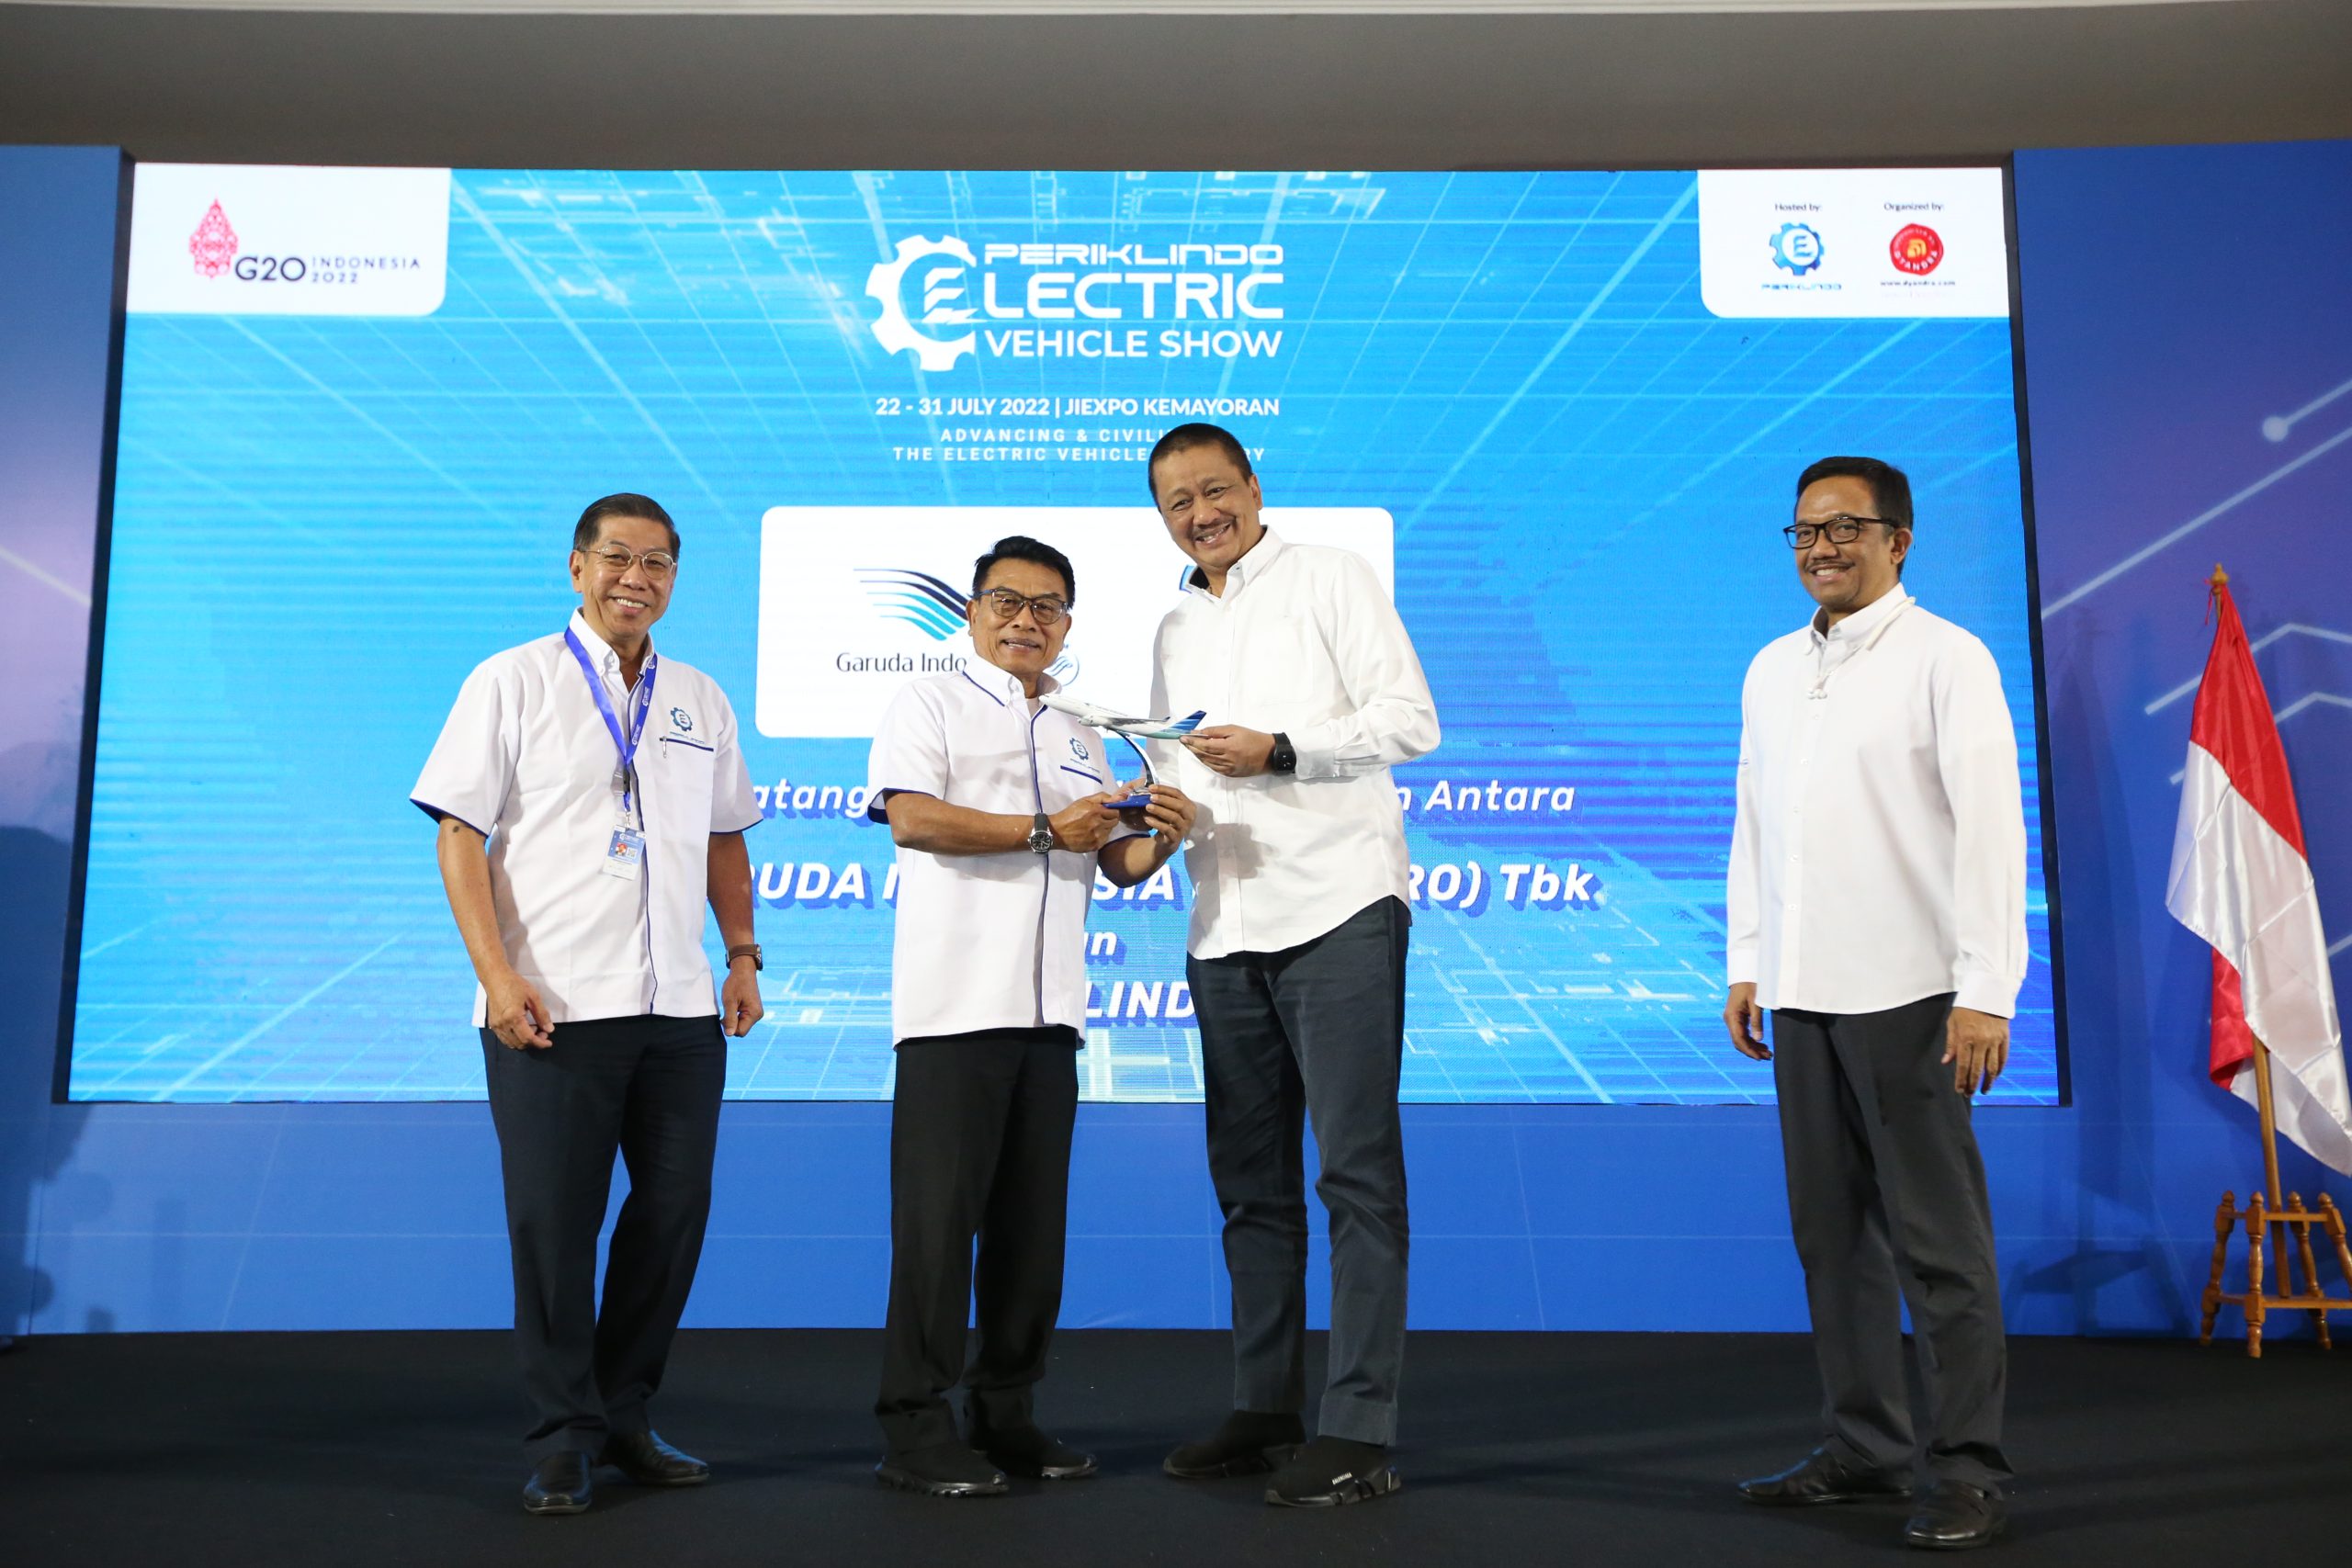 DAY 7 (PERIKLINDO ELECTRIC VEHICLE SHOW 2022)